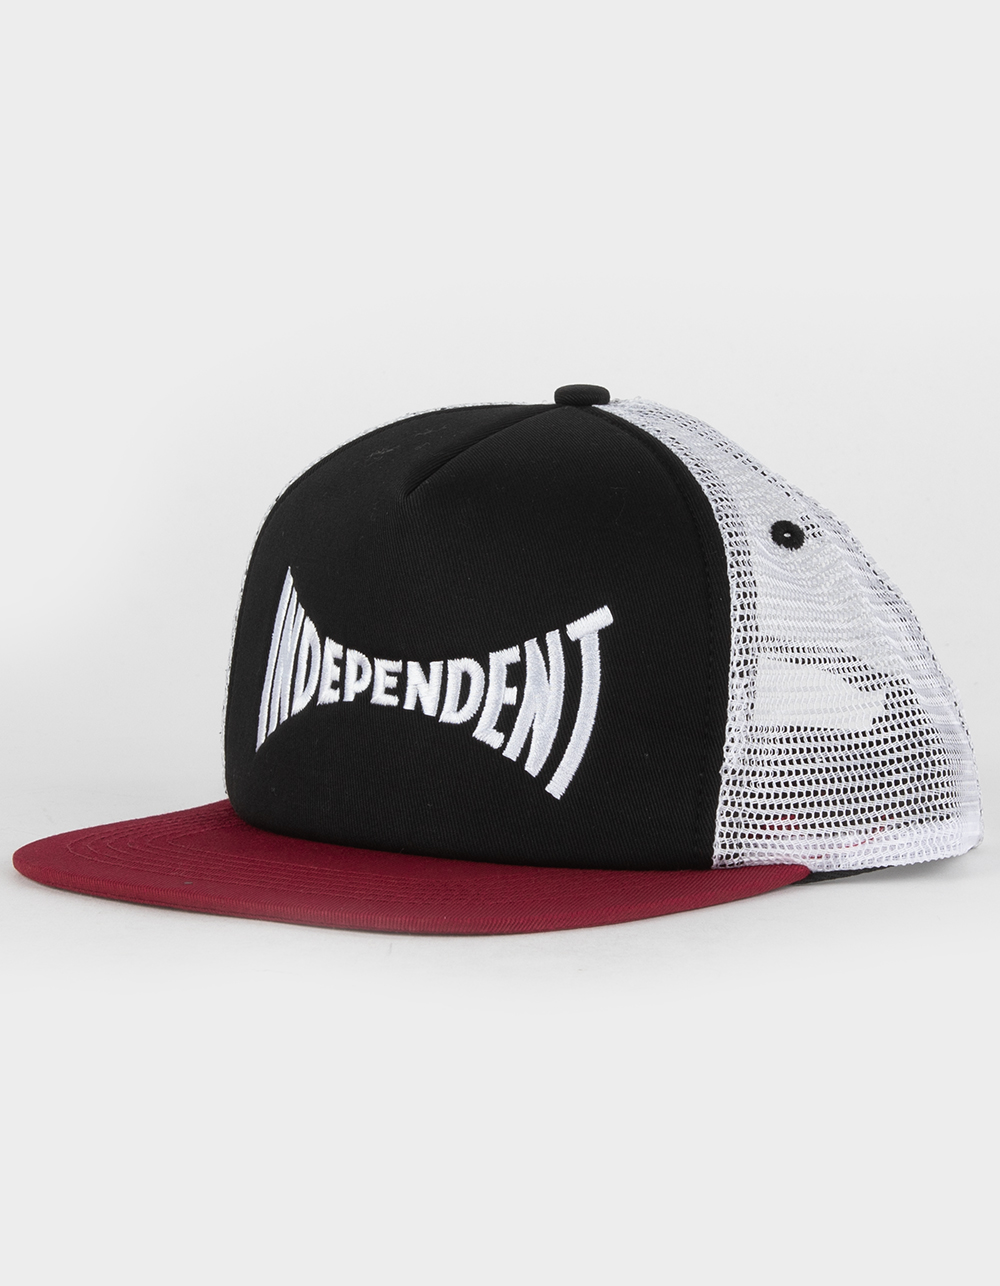 Independent Span Mesh Trucker High Profile Hat - Black/Red/White